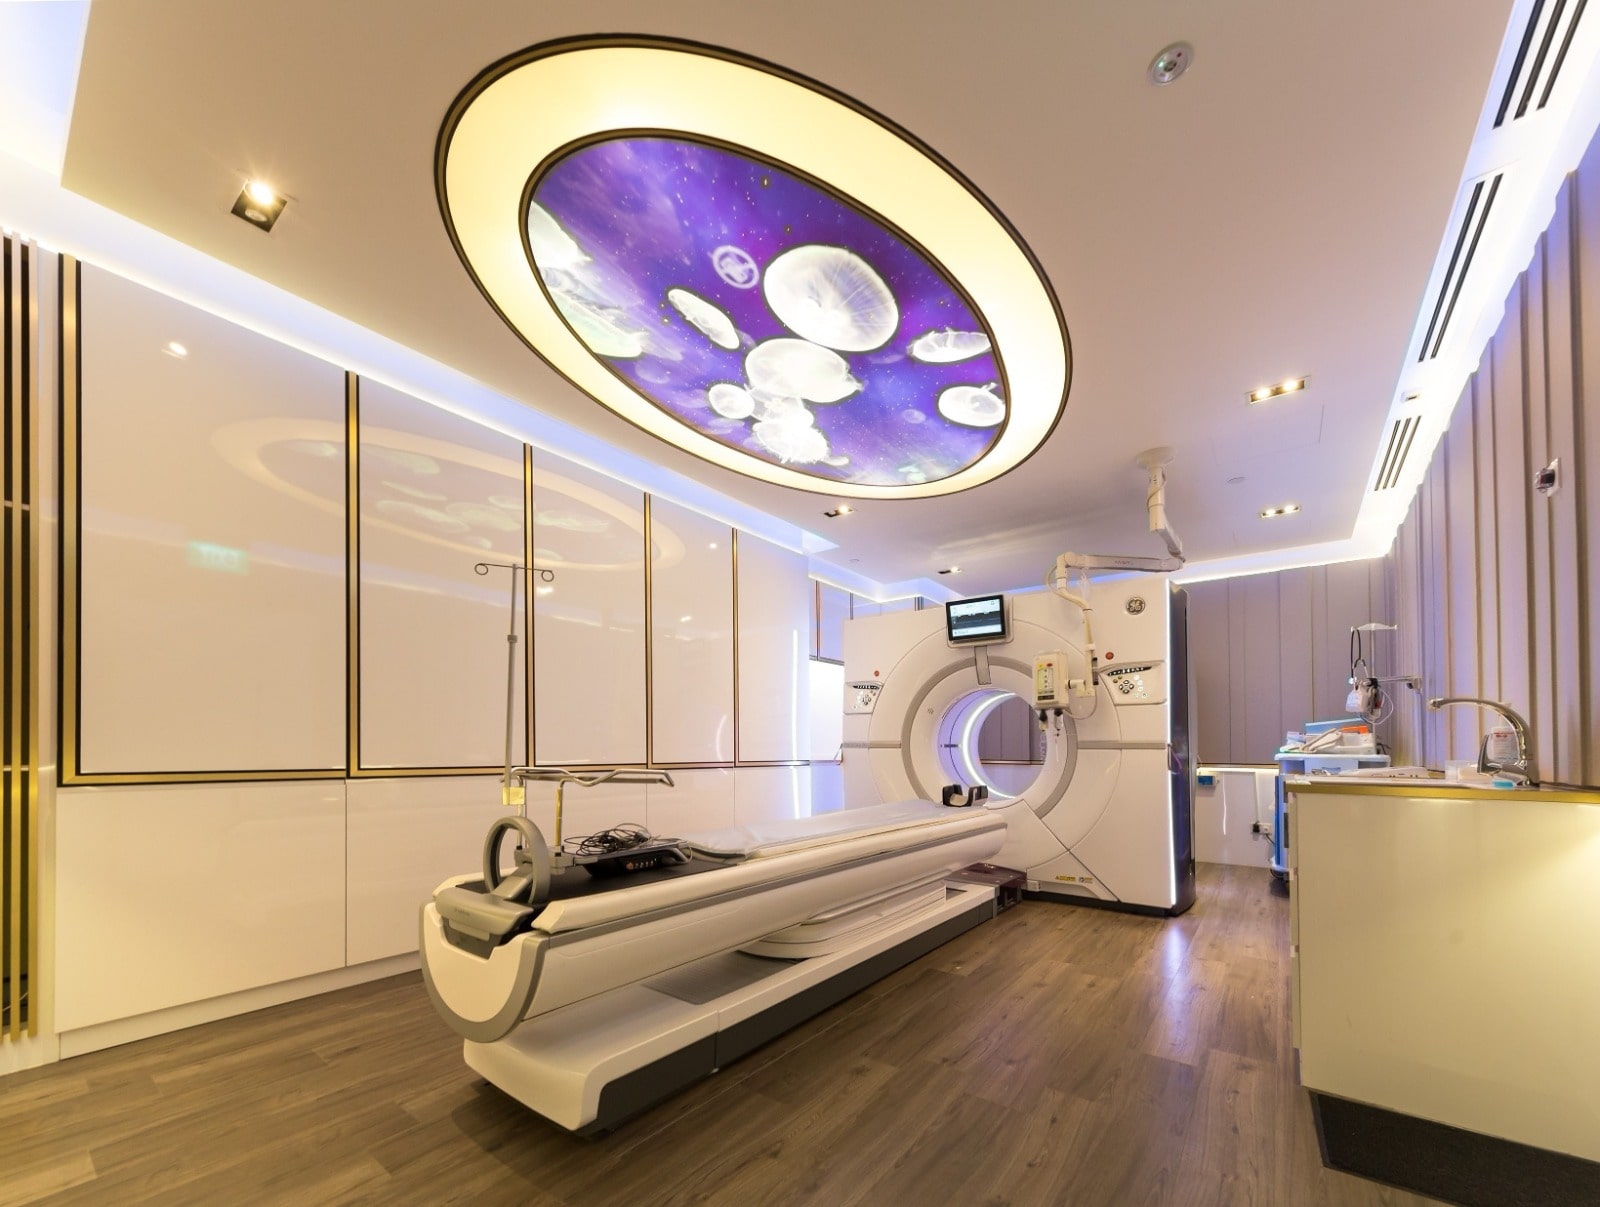 CT Scan Room